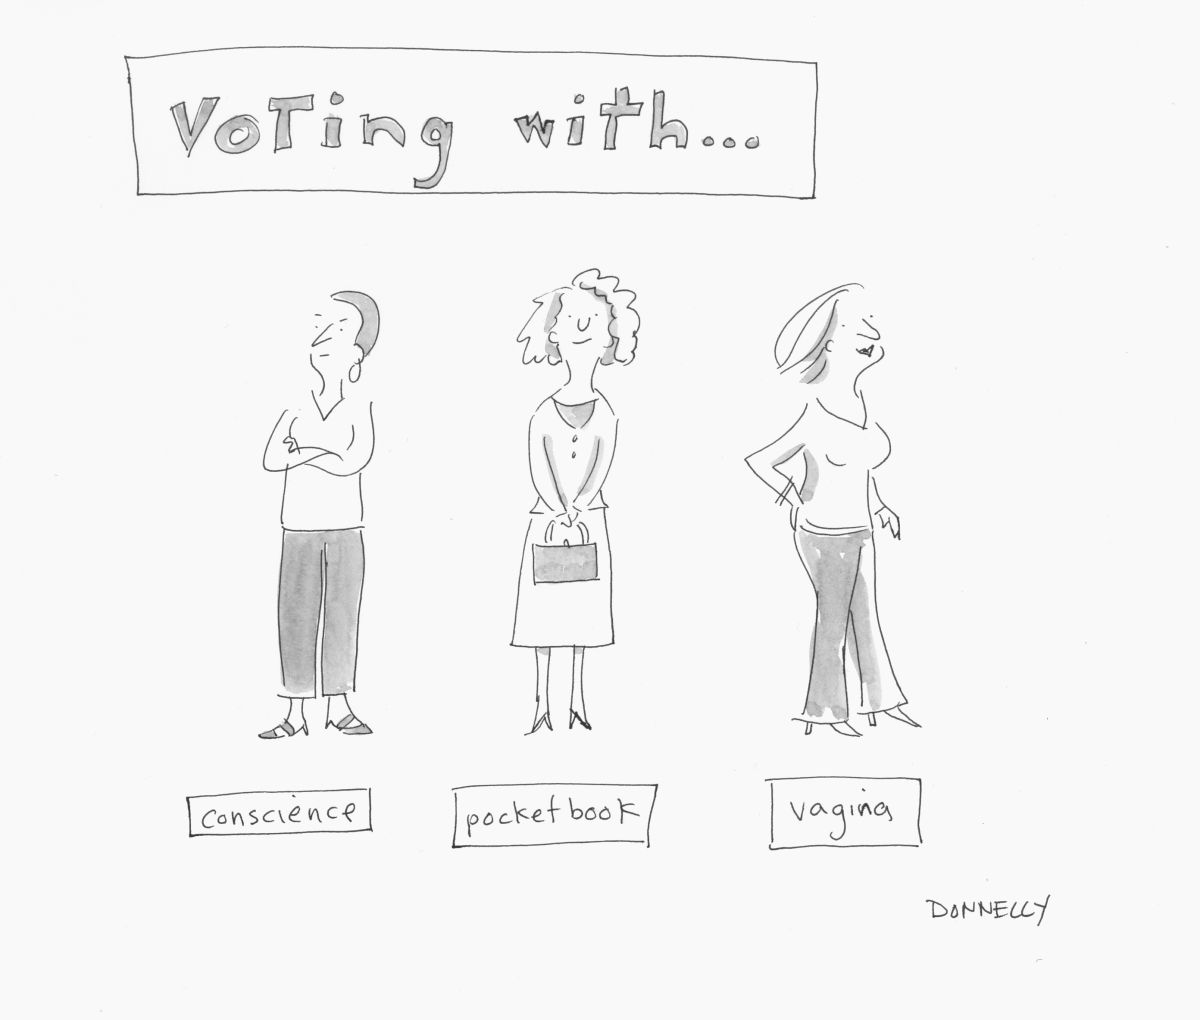 voting-with-vagina